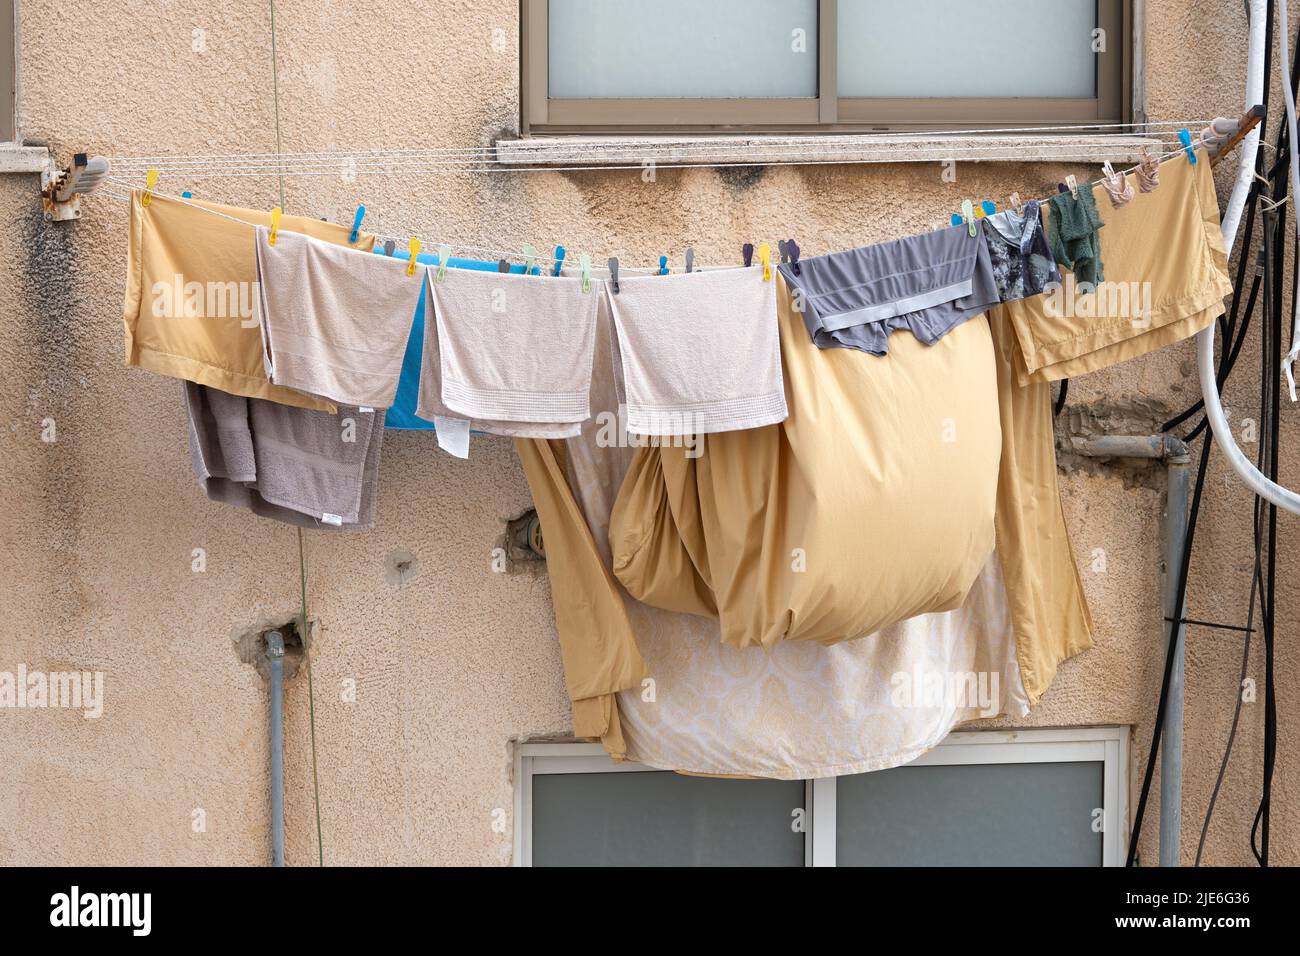 Bed linen and clothes are dried on a rope in the street in Israel Stock Photo